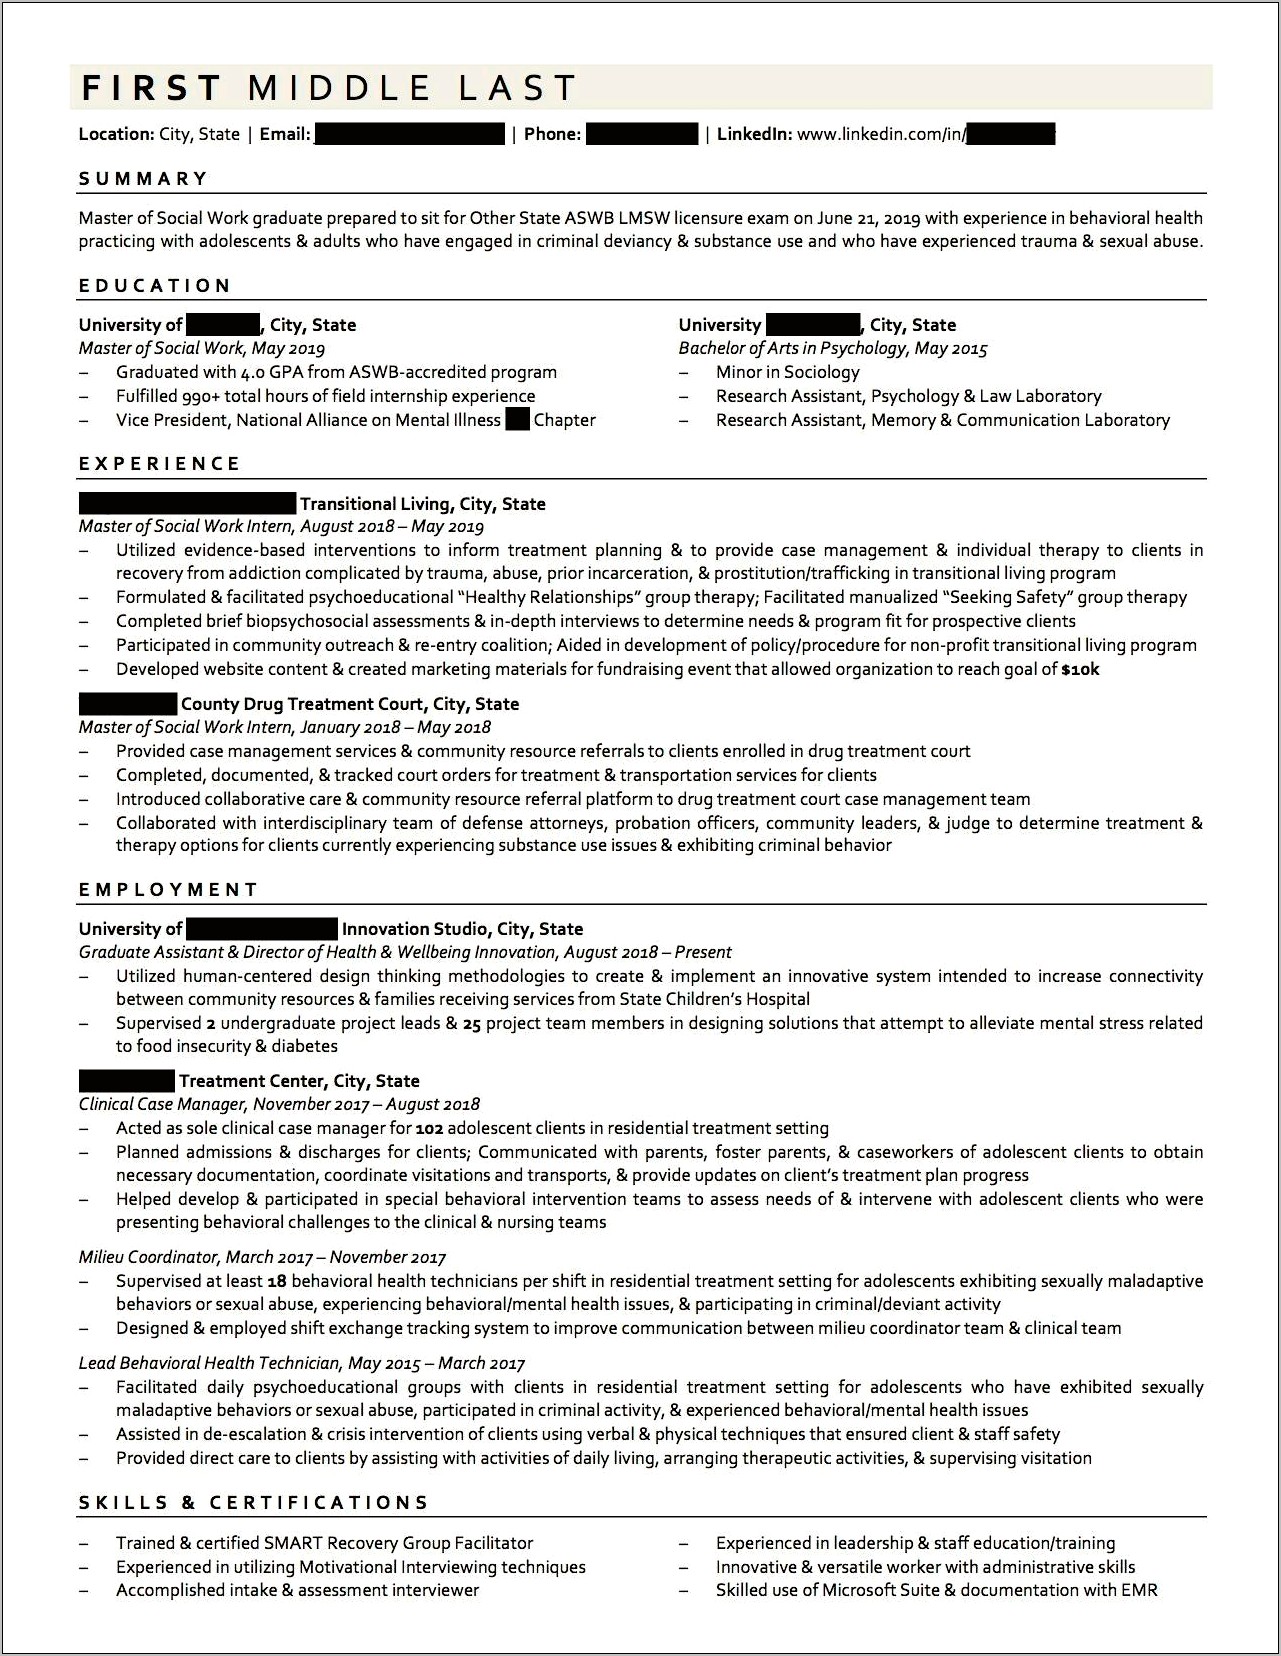 Resume Do I Include Degree Currently Working On